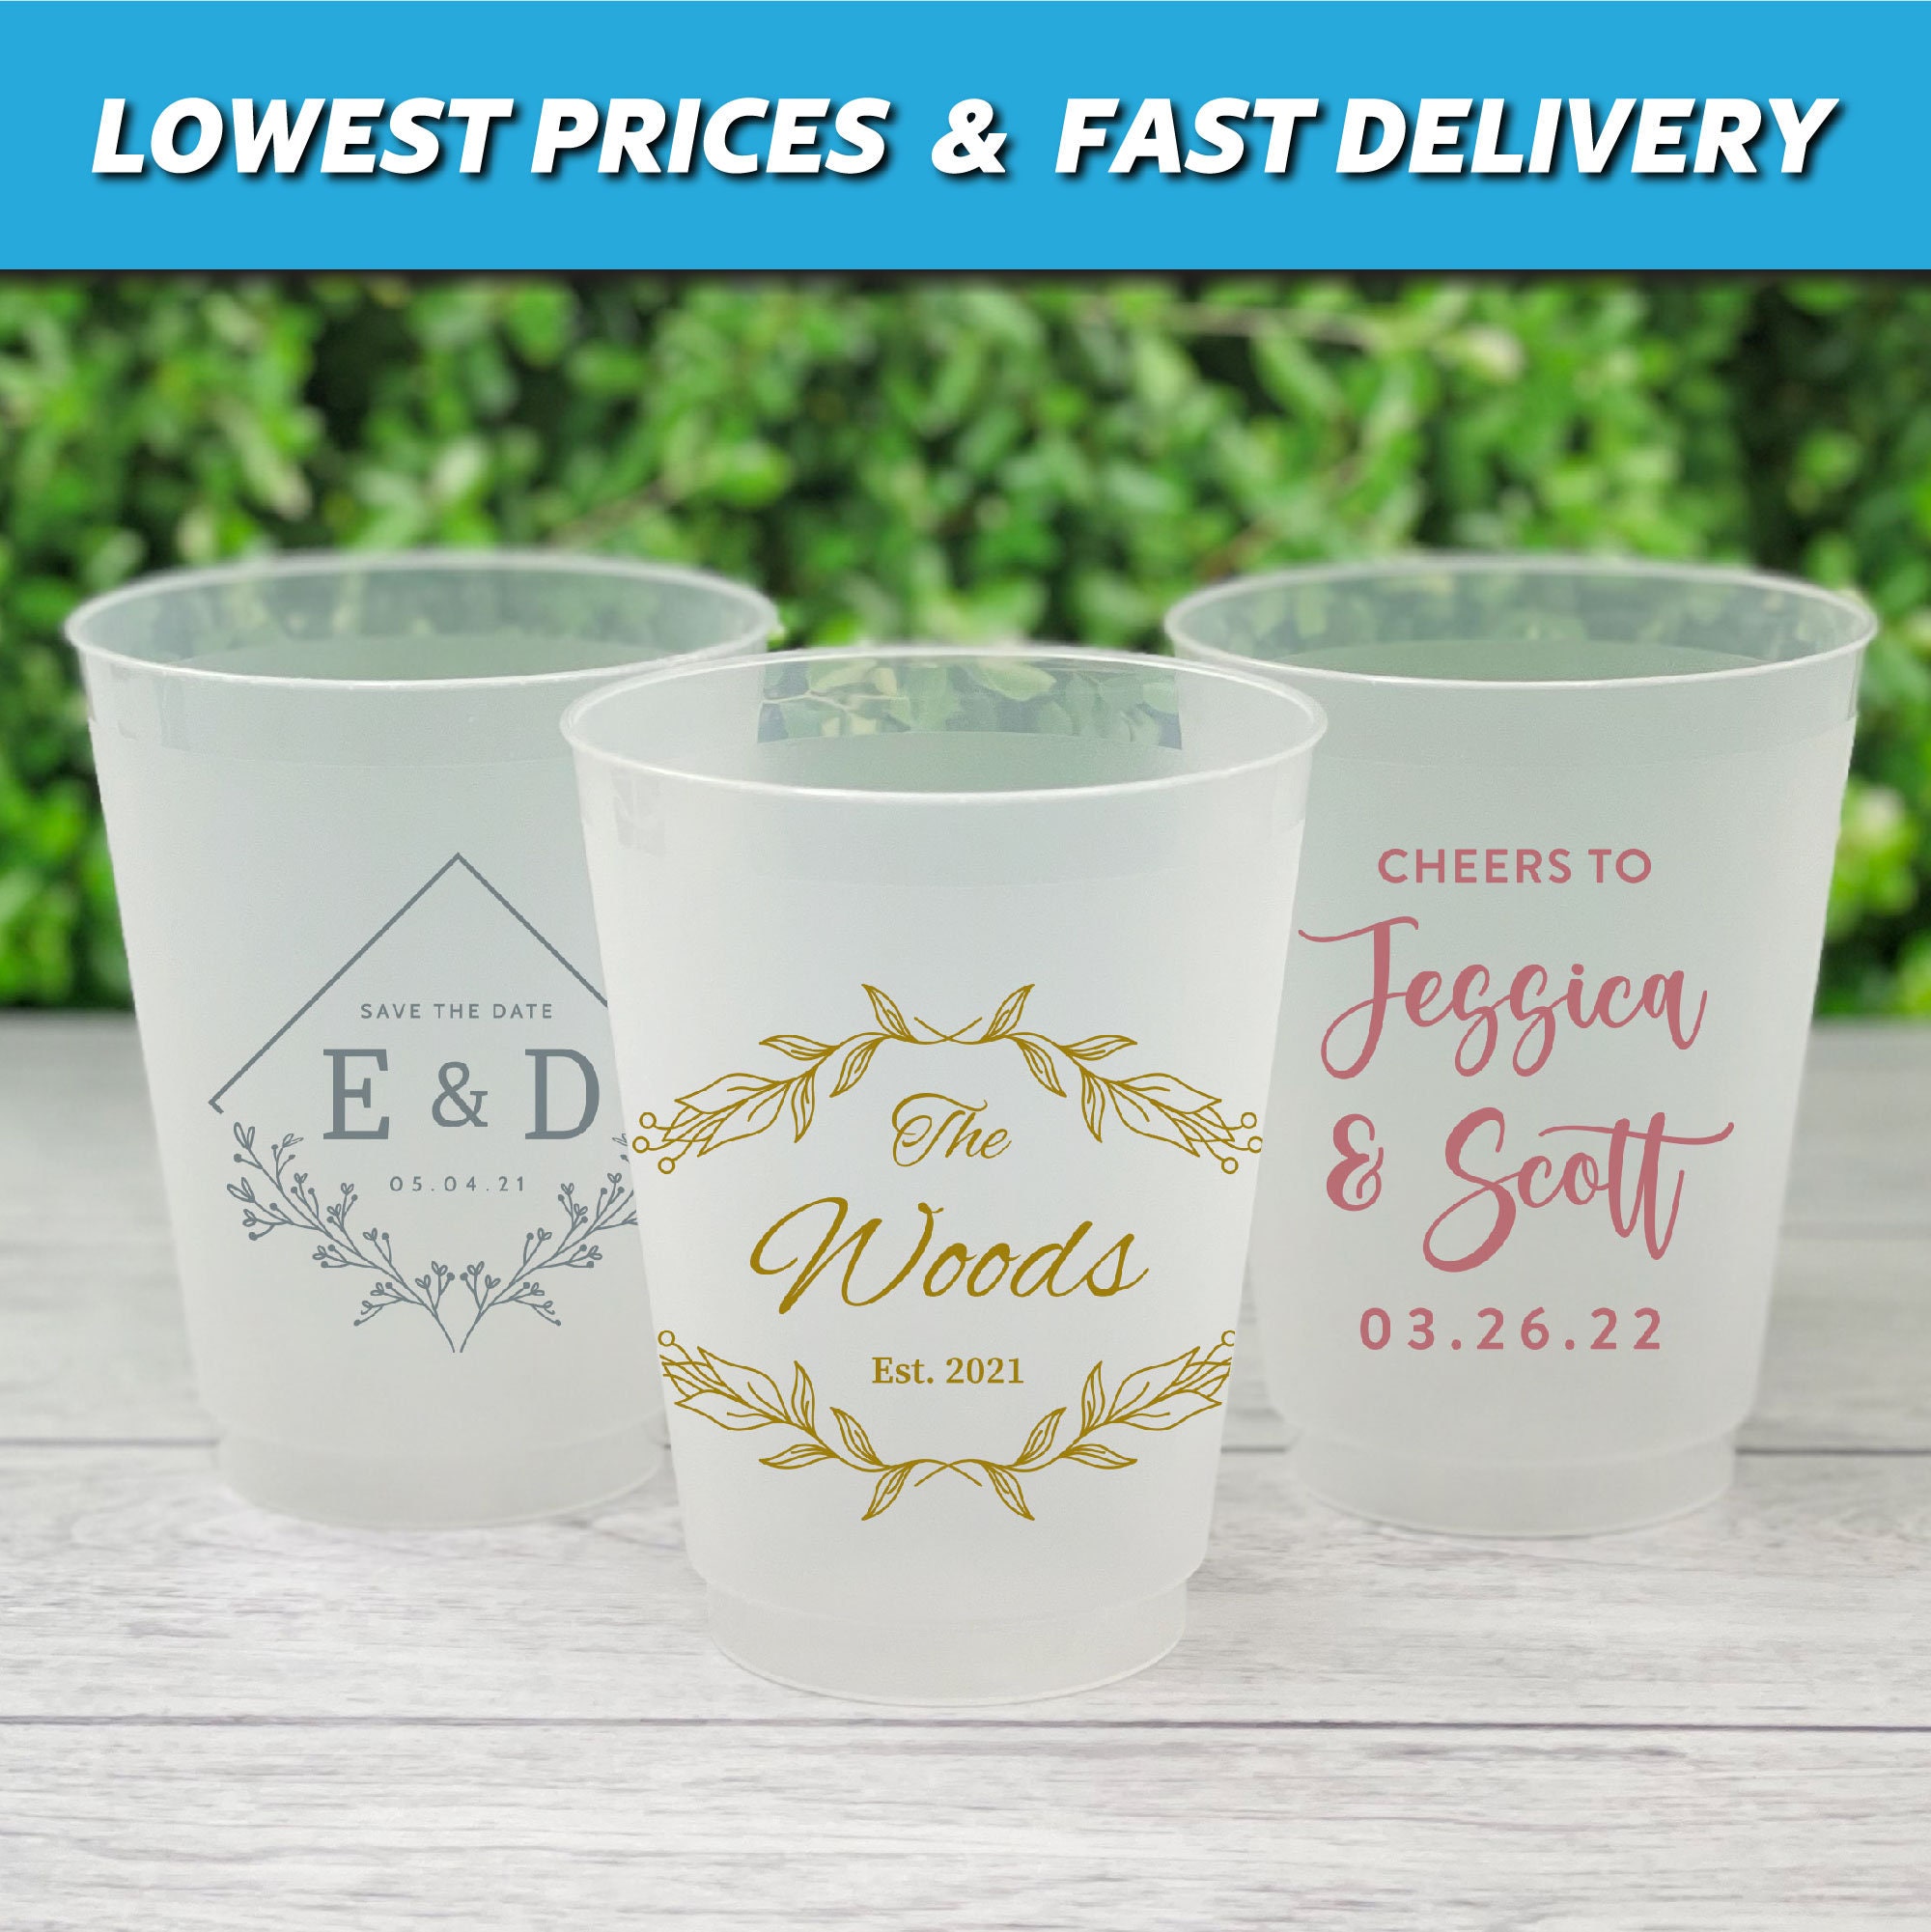 We Do Wreath - 9oz Frosted Unbreakable Plastic Cup #208 - Custom - Bridal  Wedding Favors, Wedding Cups, Party Cups, Favor